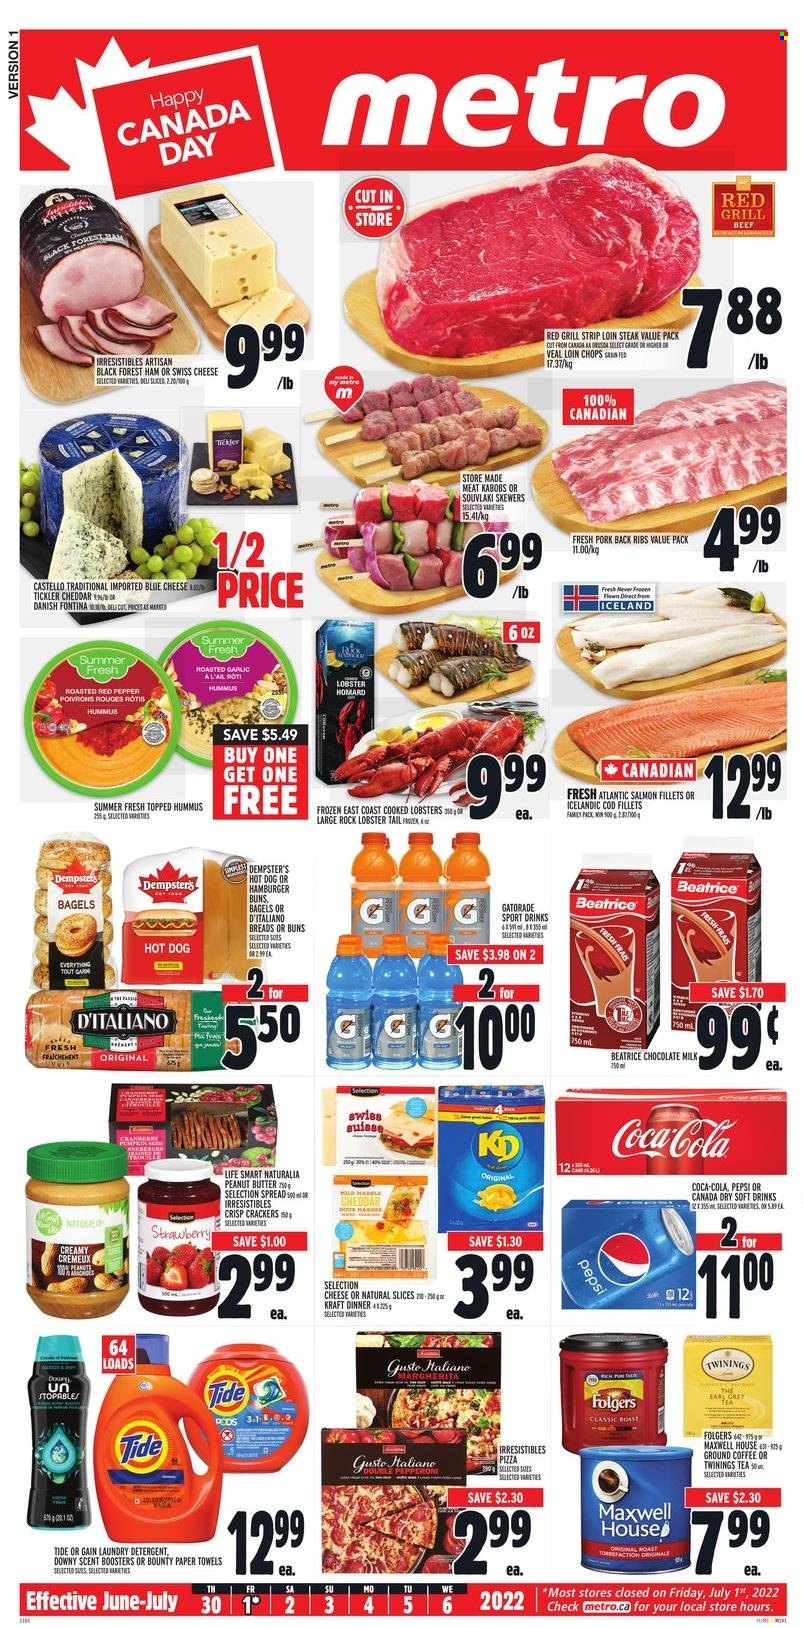 thumbnail - Metro Flyer - June 30, 2022 - July 06, 2022 - Sales products - bagels, buns, burger buns, pumpkin, cod, lobster, salmon, salmon fillet, lobster tail, hot dog, pizza, Kraft®, ham, pepperoni, hummus, blue cheese, Fontina, swiss cheese, cheddar, milk, milk chocolate, chocolate, Bounty, crackers, peanut butter, Canada Dry, Coca-Cola, Pepsi, soft drink, Gatorade, Maxwell House, tea, Twinings, coffee, Folgers, ground coffee, pork meat, pork ribs, pork back ribs, kitchen towels, paper towels, Gain, Tide, laundry detergent, scent booster, grill, detergent, steak. Page 1.